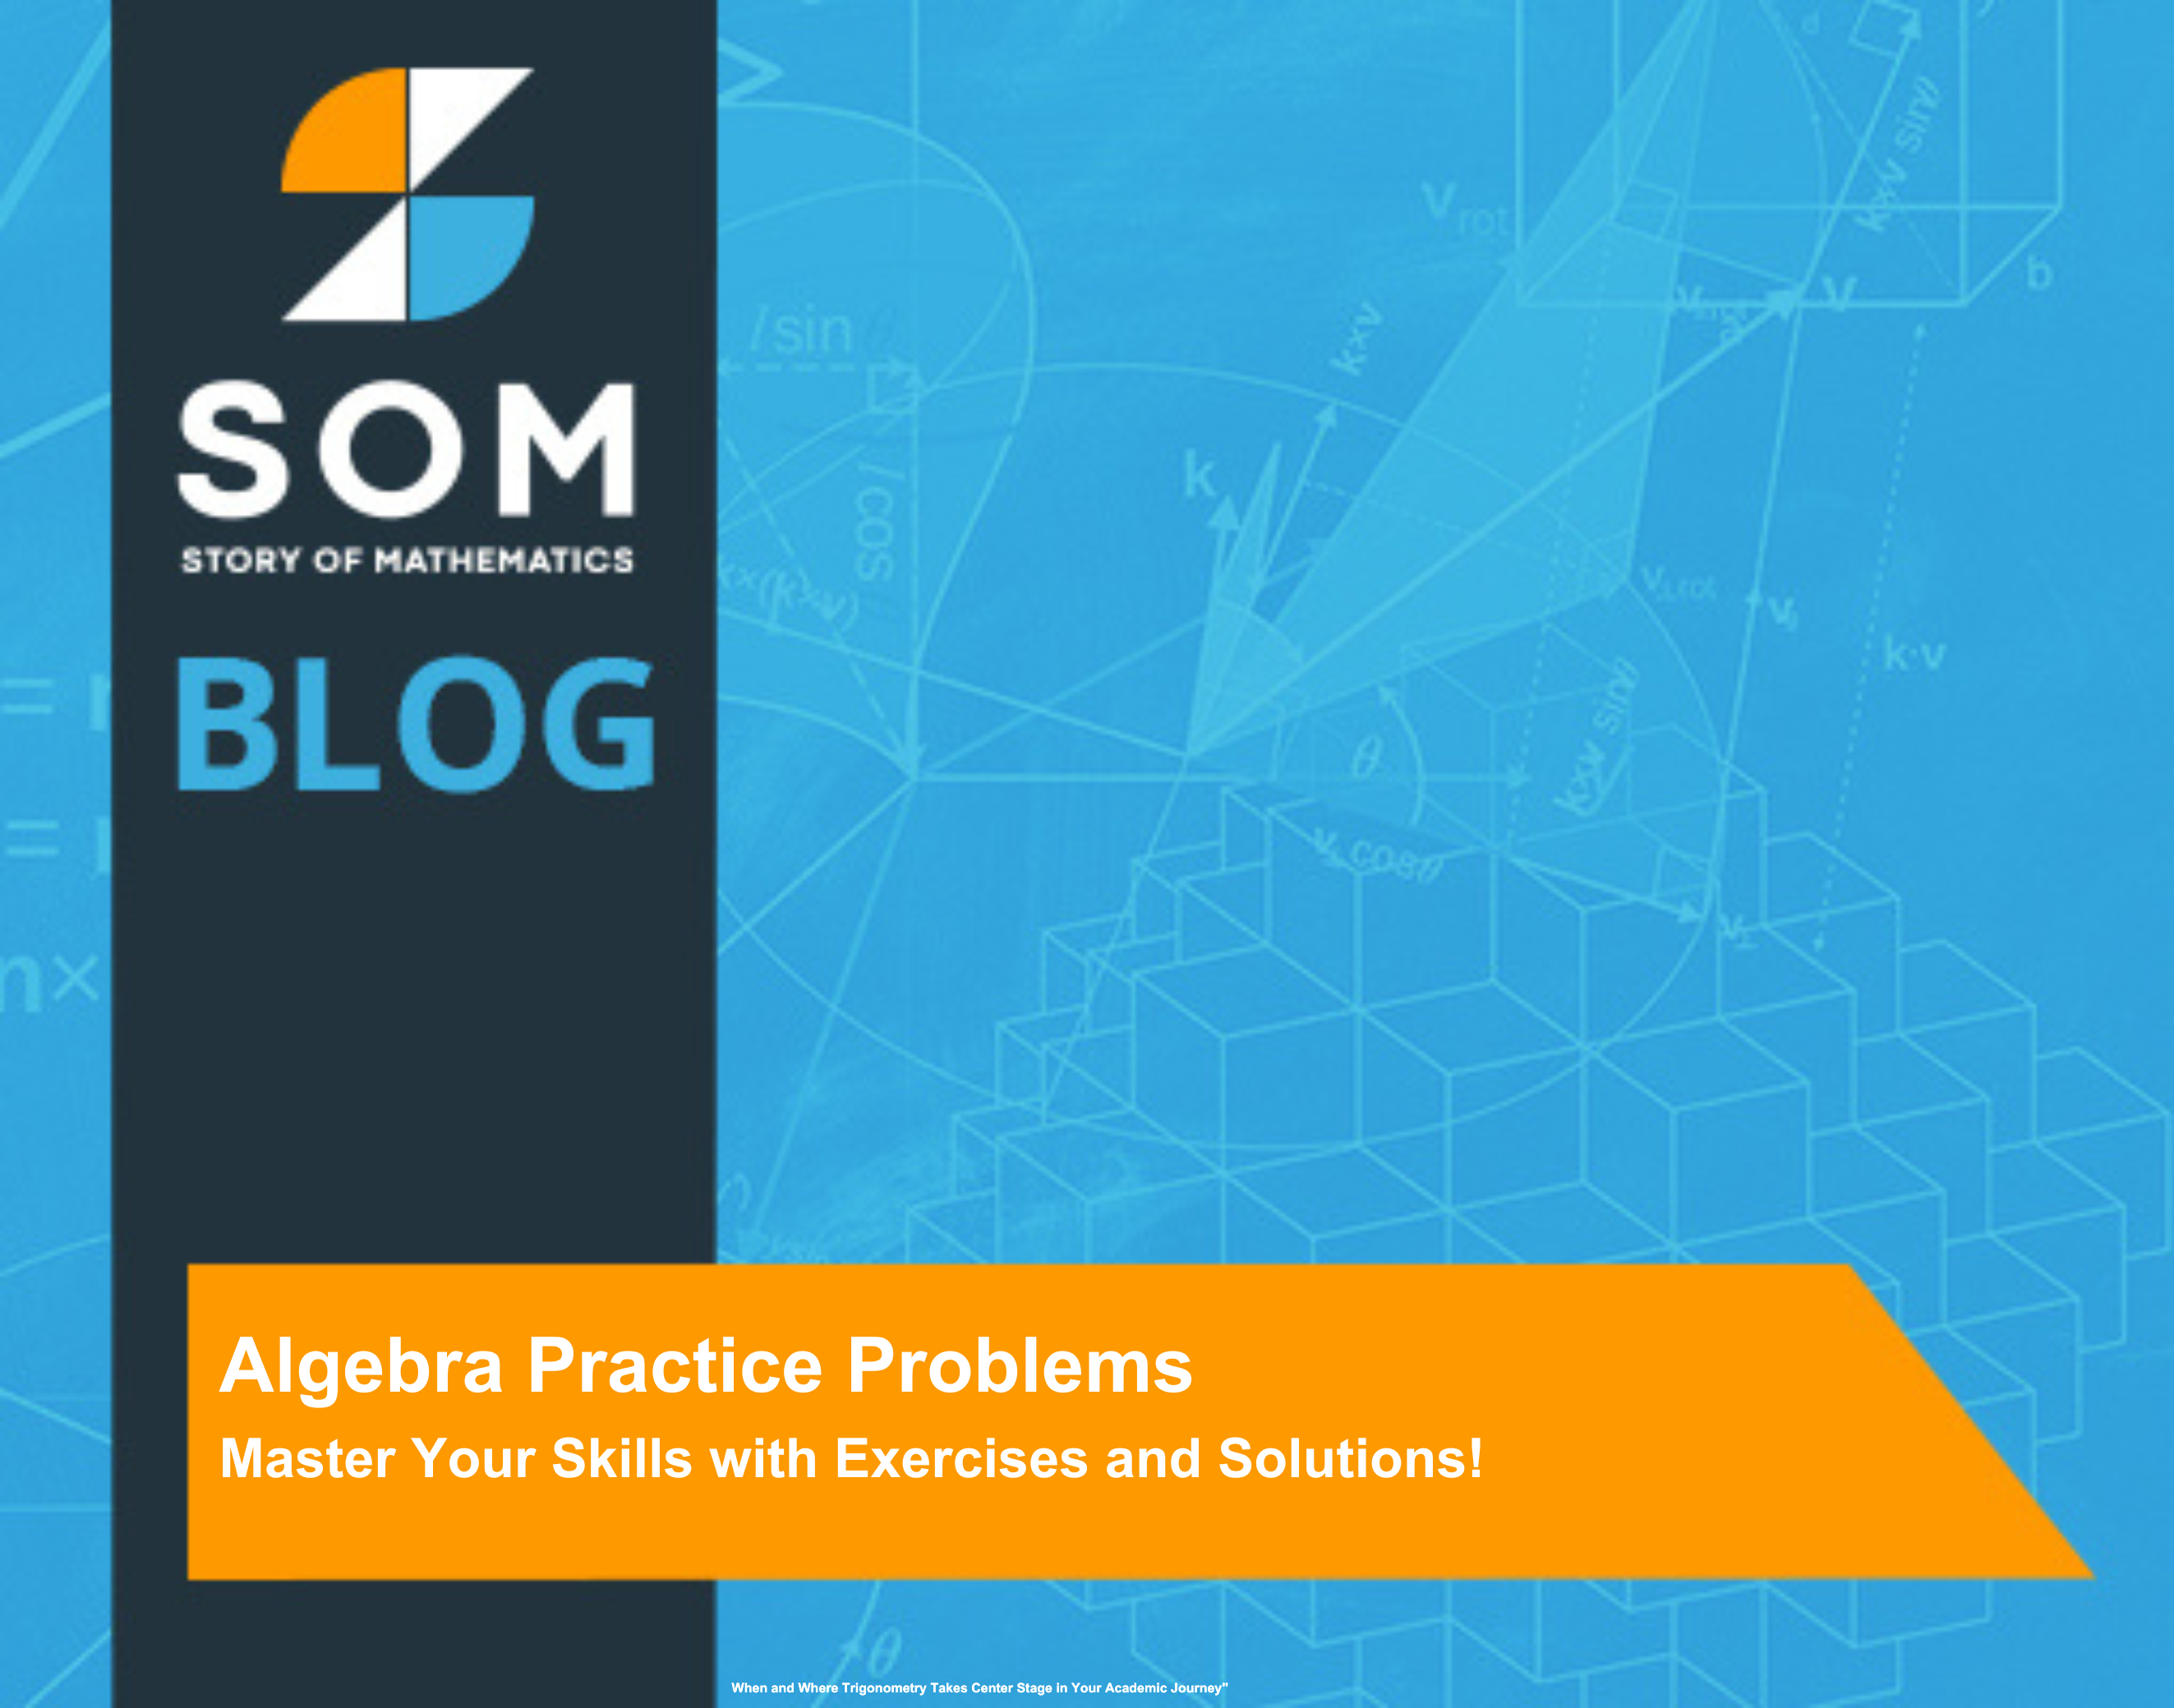 Feature Image Algebra Practice Problems Master Your Skills with Exercises and Solutions!